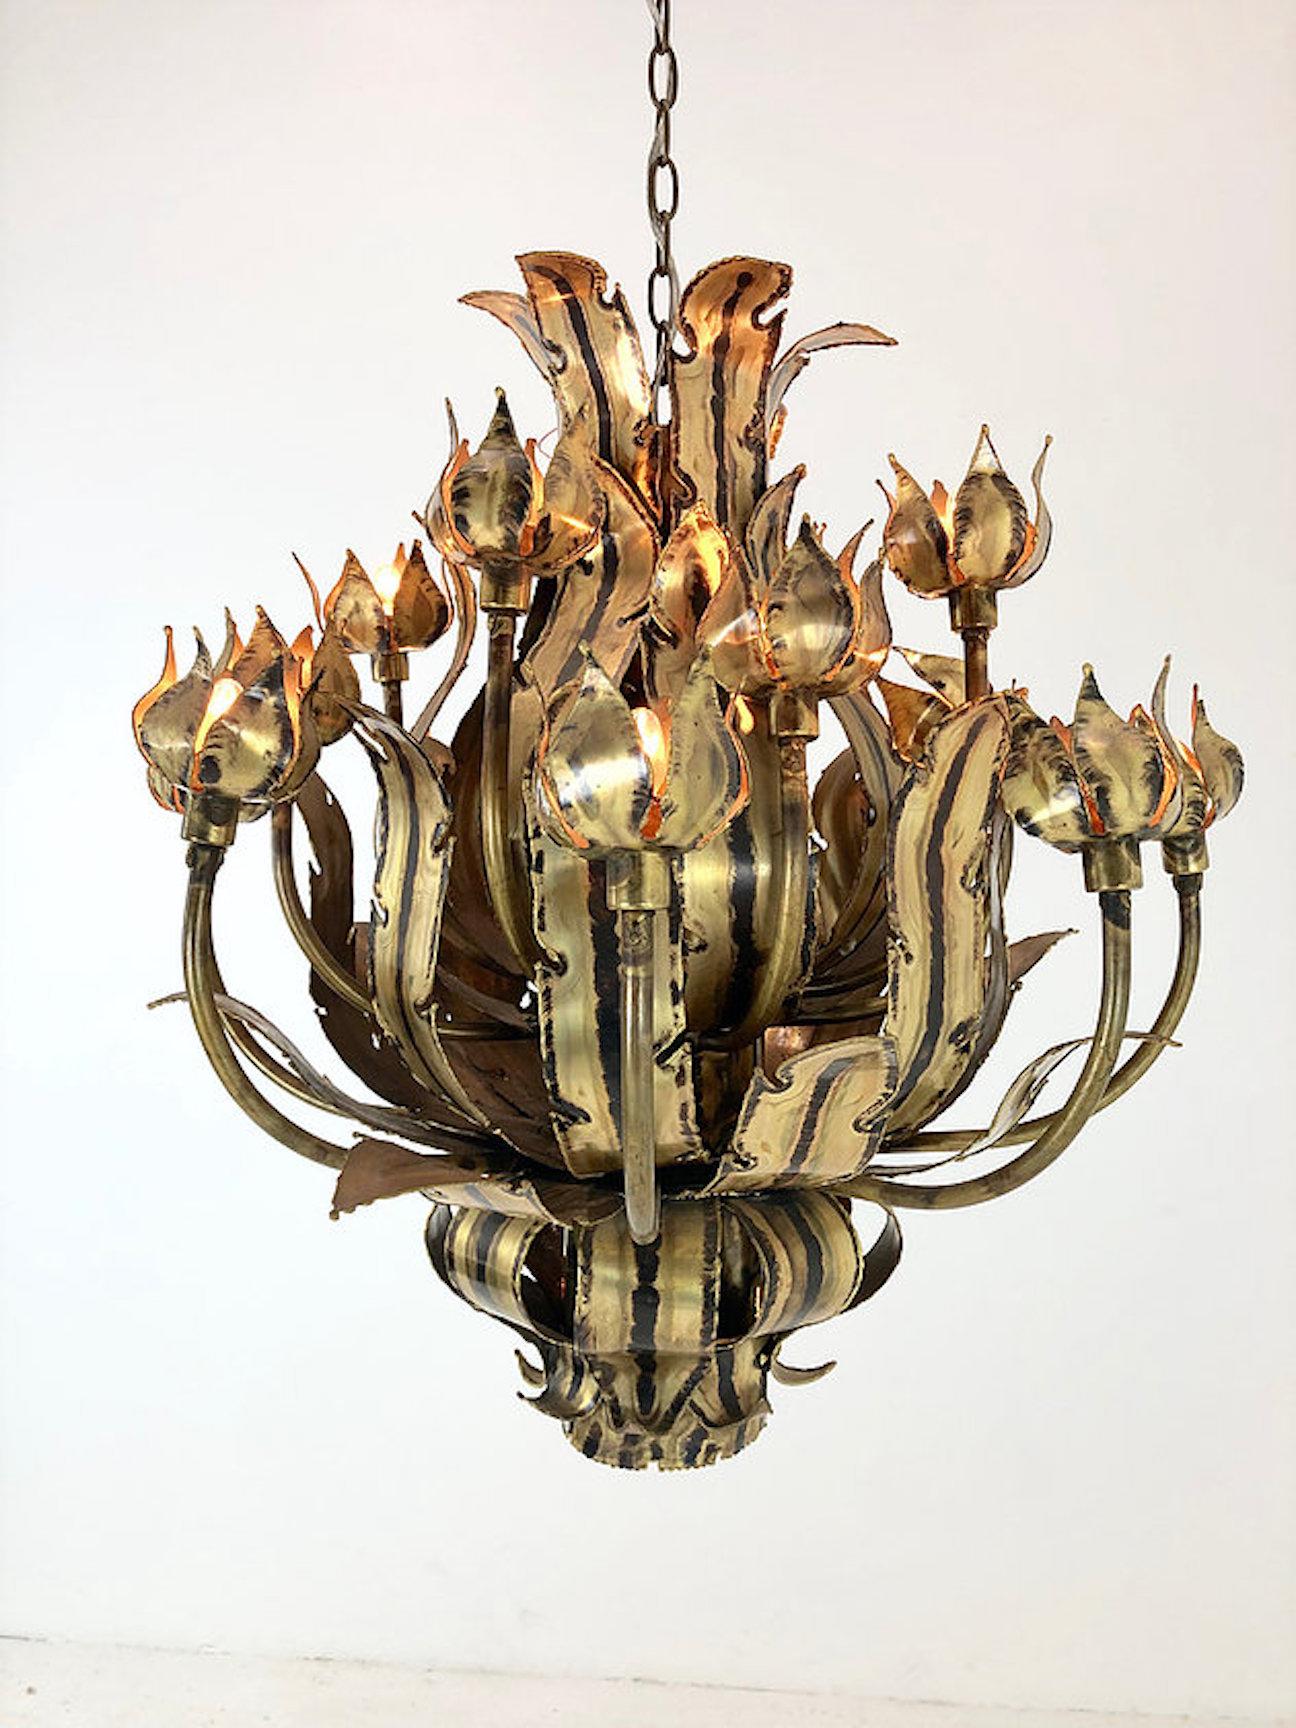 Brutalist flower bud torch cut chandelier by Tom Greene. In good vintage condition with a couple of areas that need touchup welding.

Dimensions: 26 diameter x 29